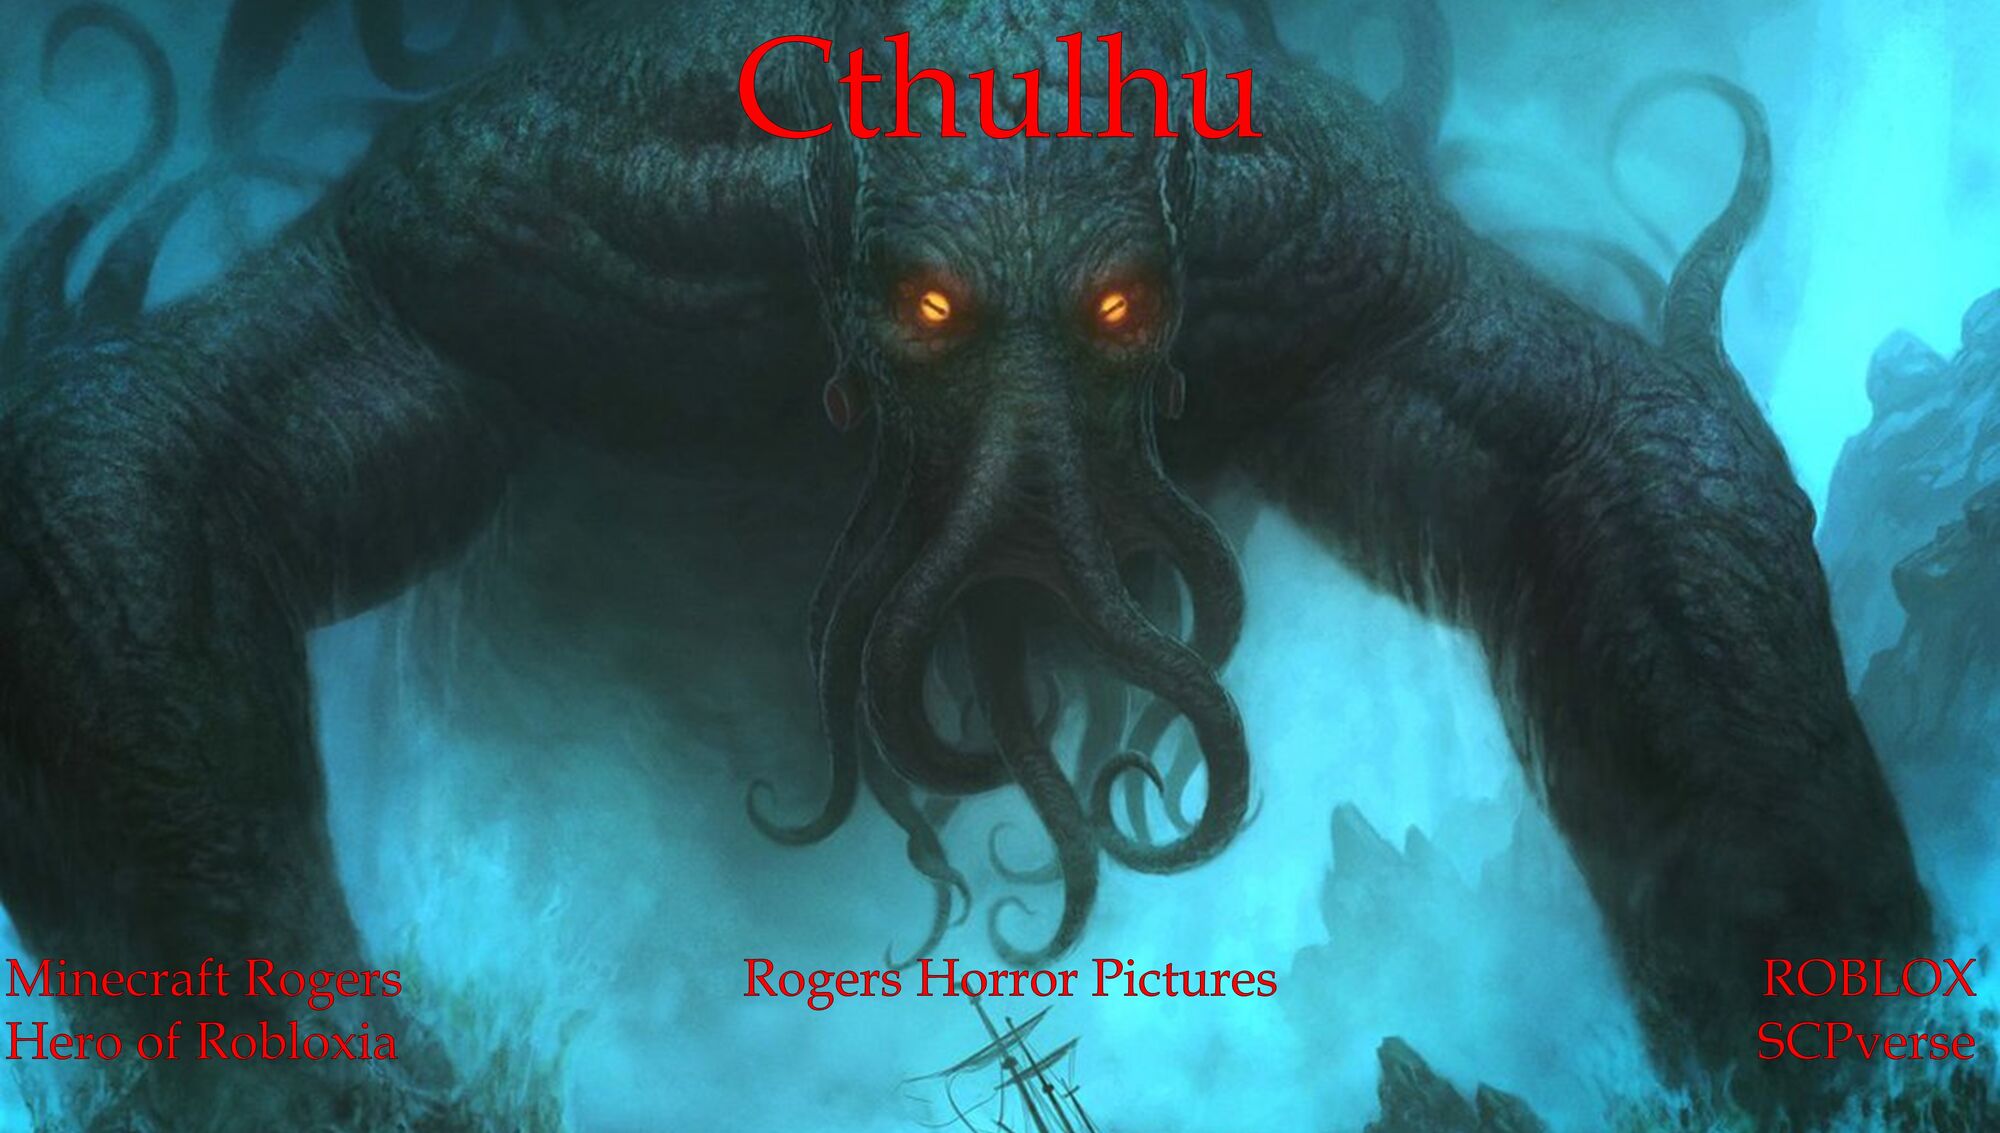 Roblox Scpverse Cthulhu Roblox Scpverse Wiki Fandom - roblox scuba diving at quill lake wiki